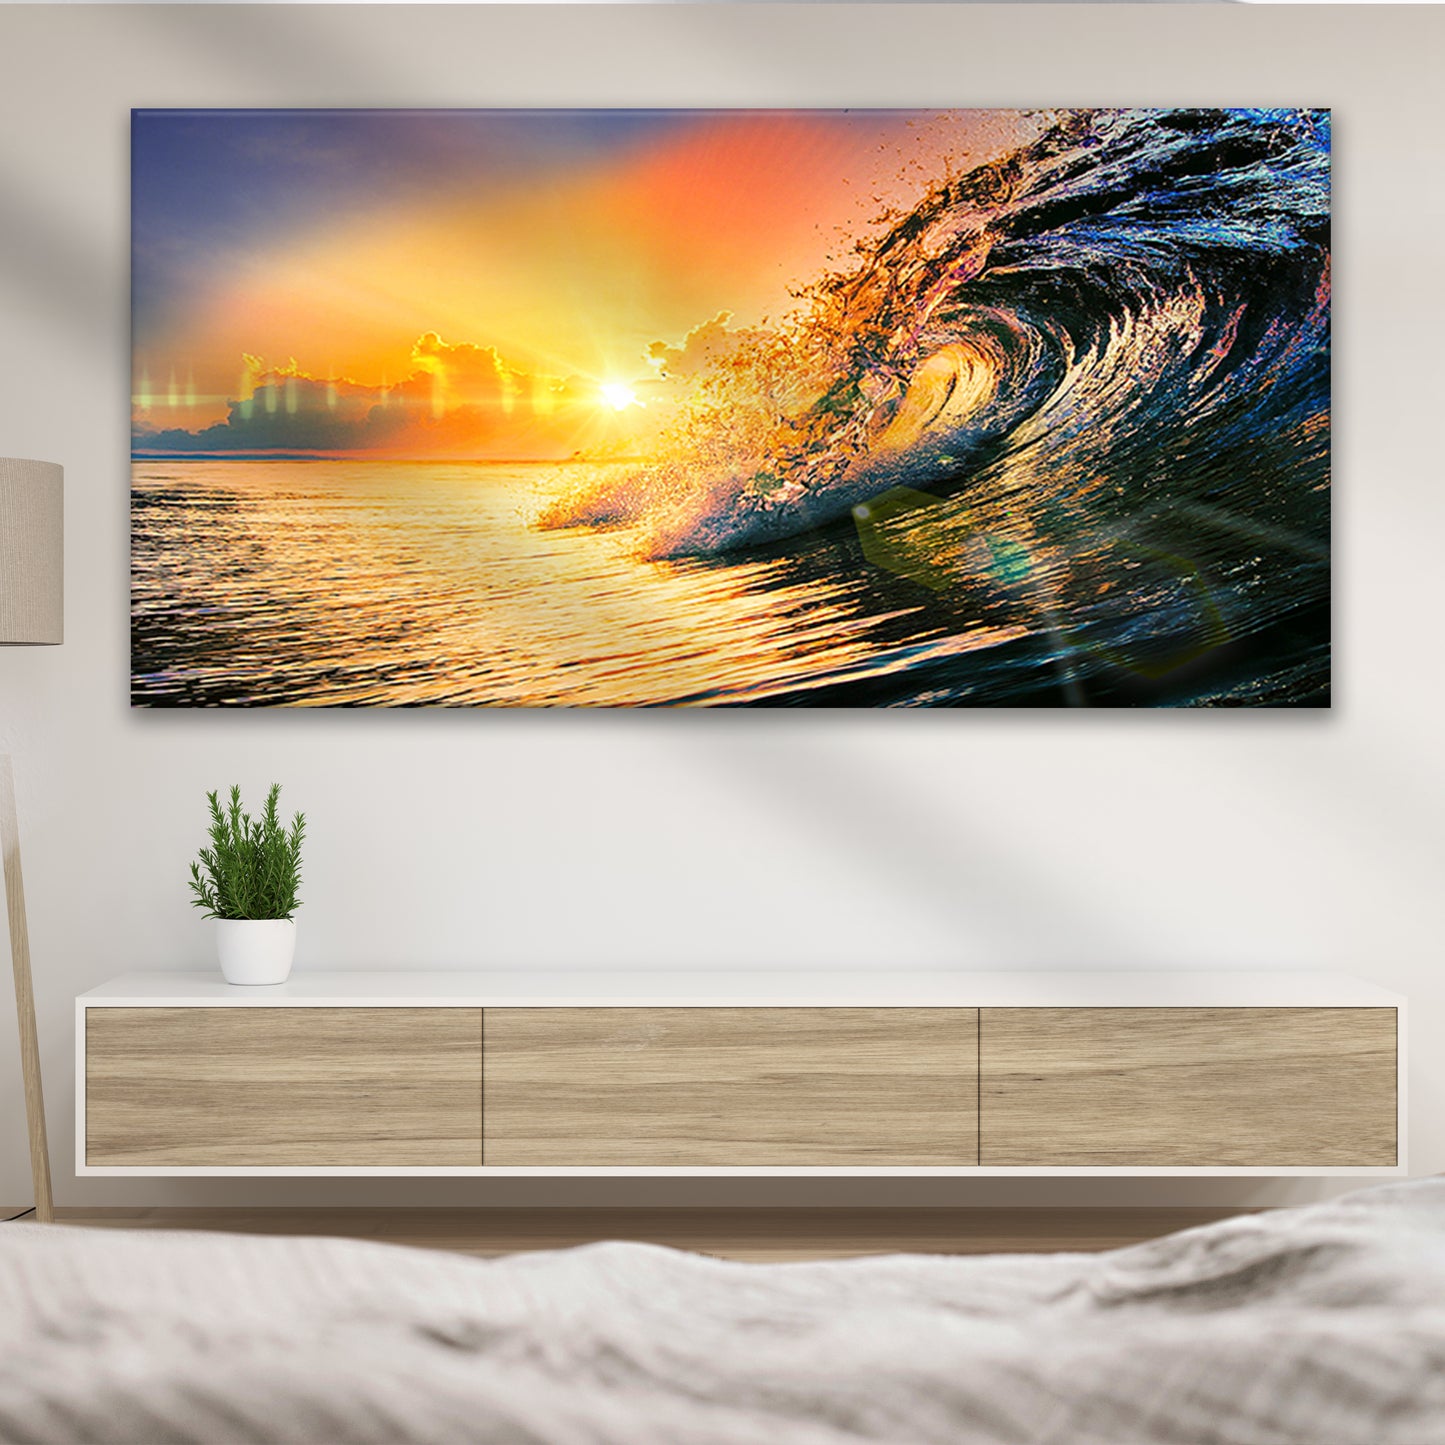 Fantastic Morning Blue Sea Canvas Wall Art - Image by Tailored Canvases